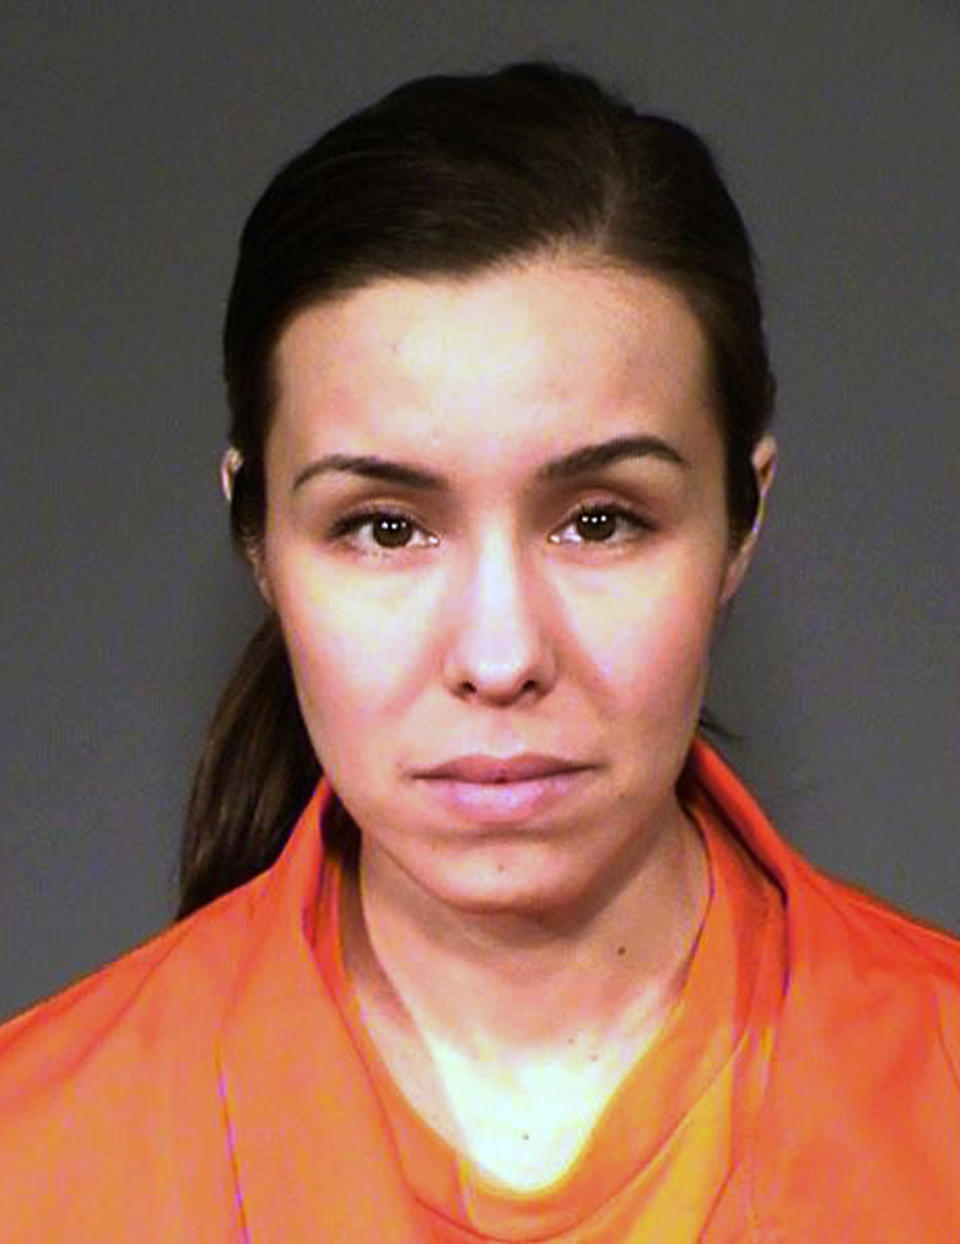 FILE - This undated file photo provided by the Arizona Department of Corrections shows Jodi Arias. Prosecutors face a Friday, Jan. 25, 2019 deadline for responding to Arias' appeal of her murder conviction in the 2008 death of her former boyfriend. Lawyers for Arias filed their appellate brief in July. (Arizona Department of Corrections via AP, File)